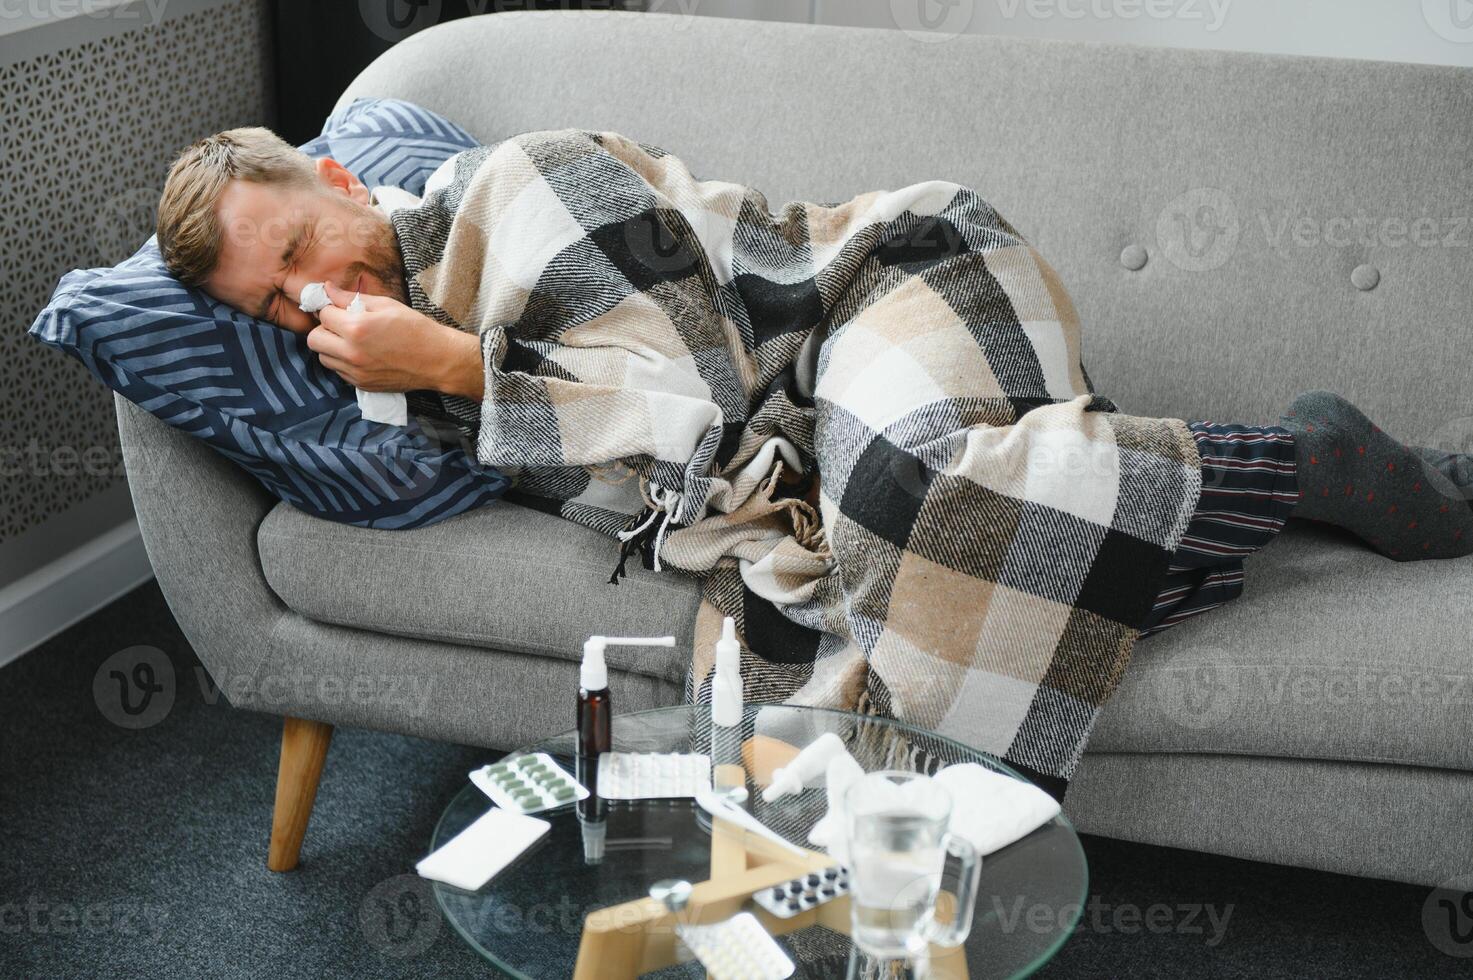 It's cold at home in wintertime. Man freezing in his house in winter because of broken thermostat. young guy wrapped in woolen plaid shivering while sitting on sofa in living room interior photo